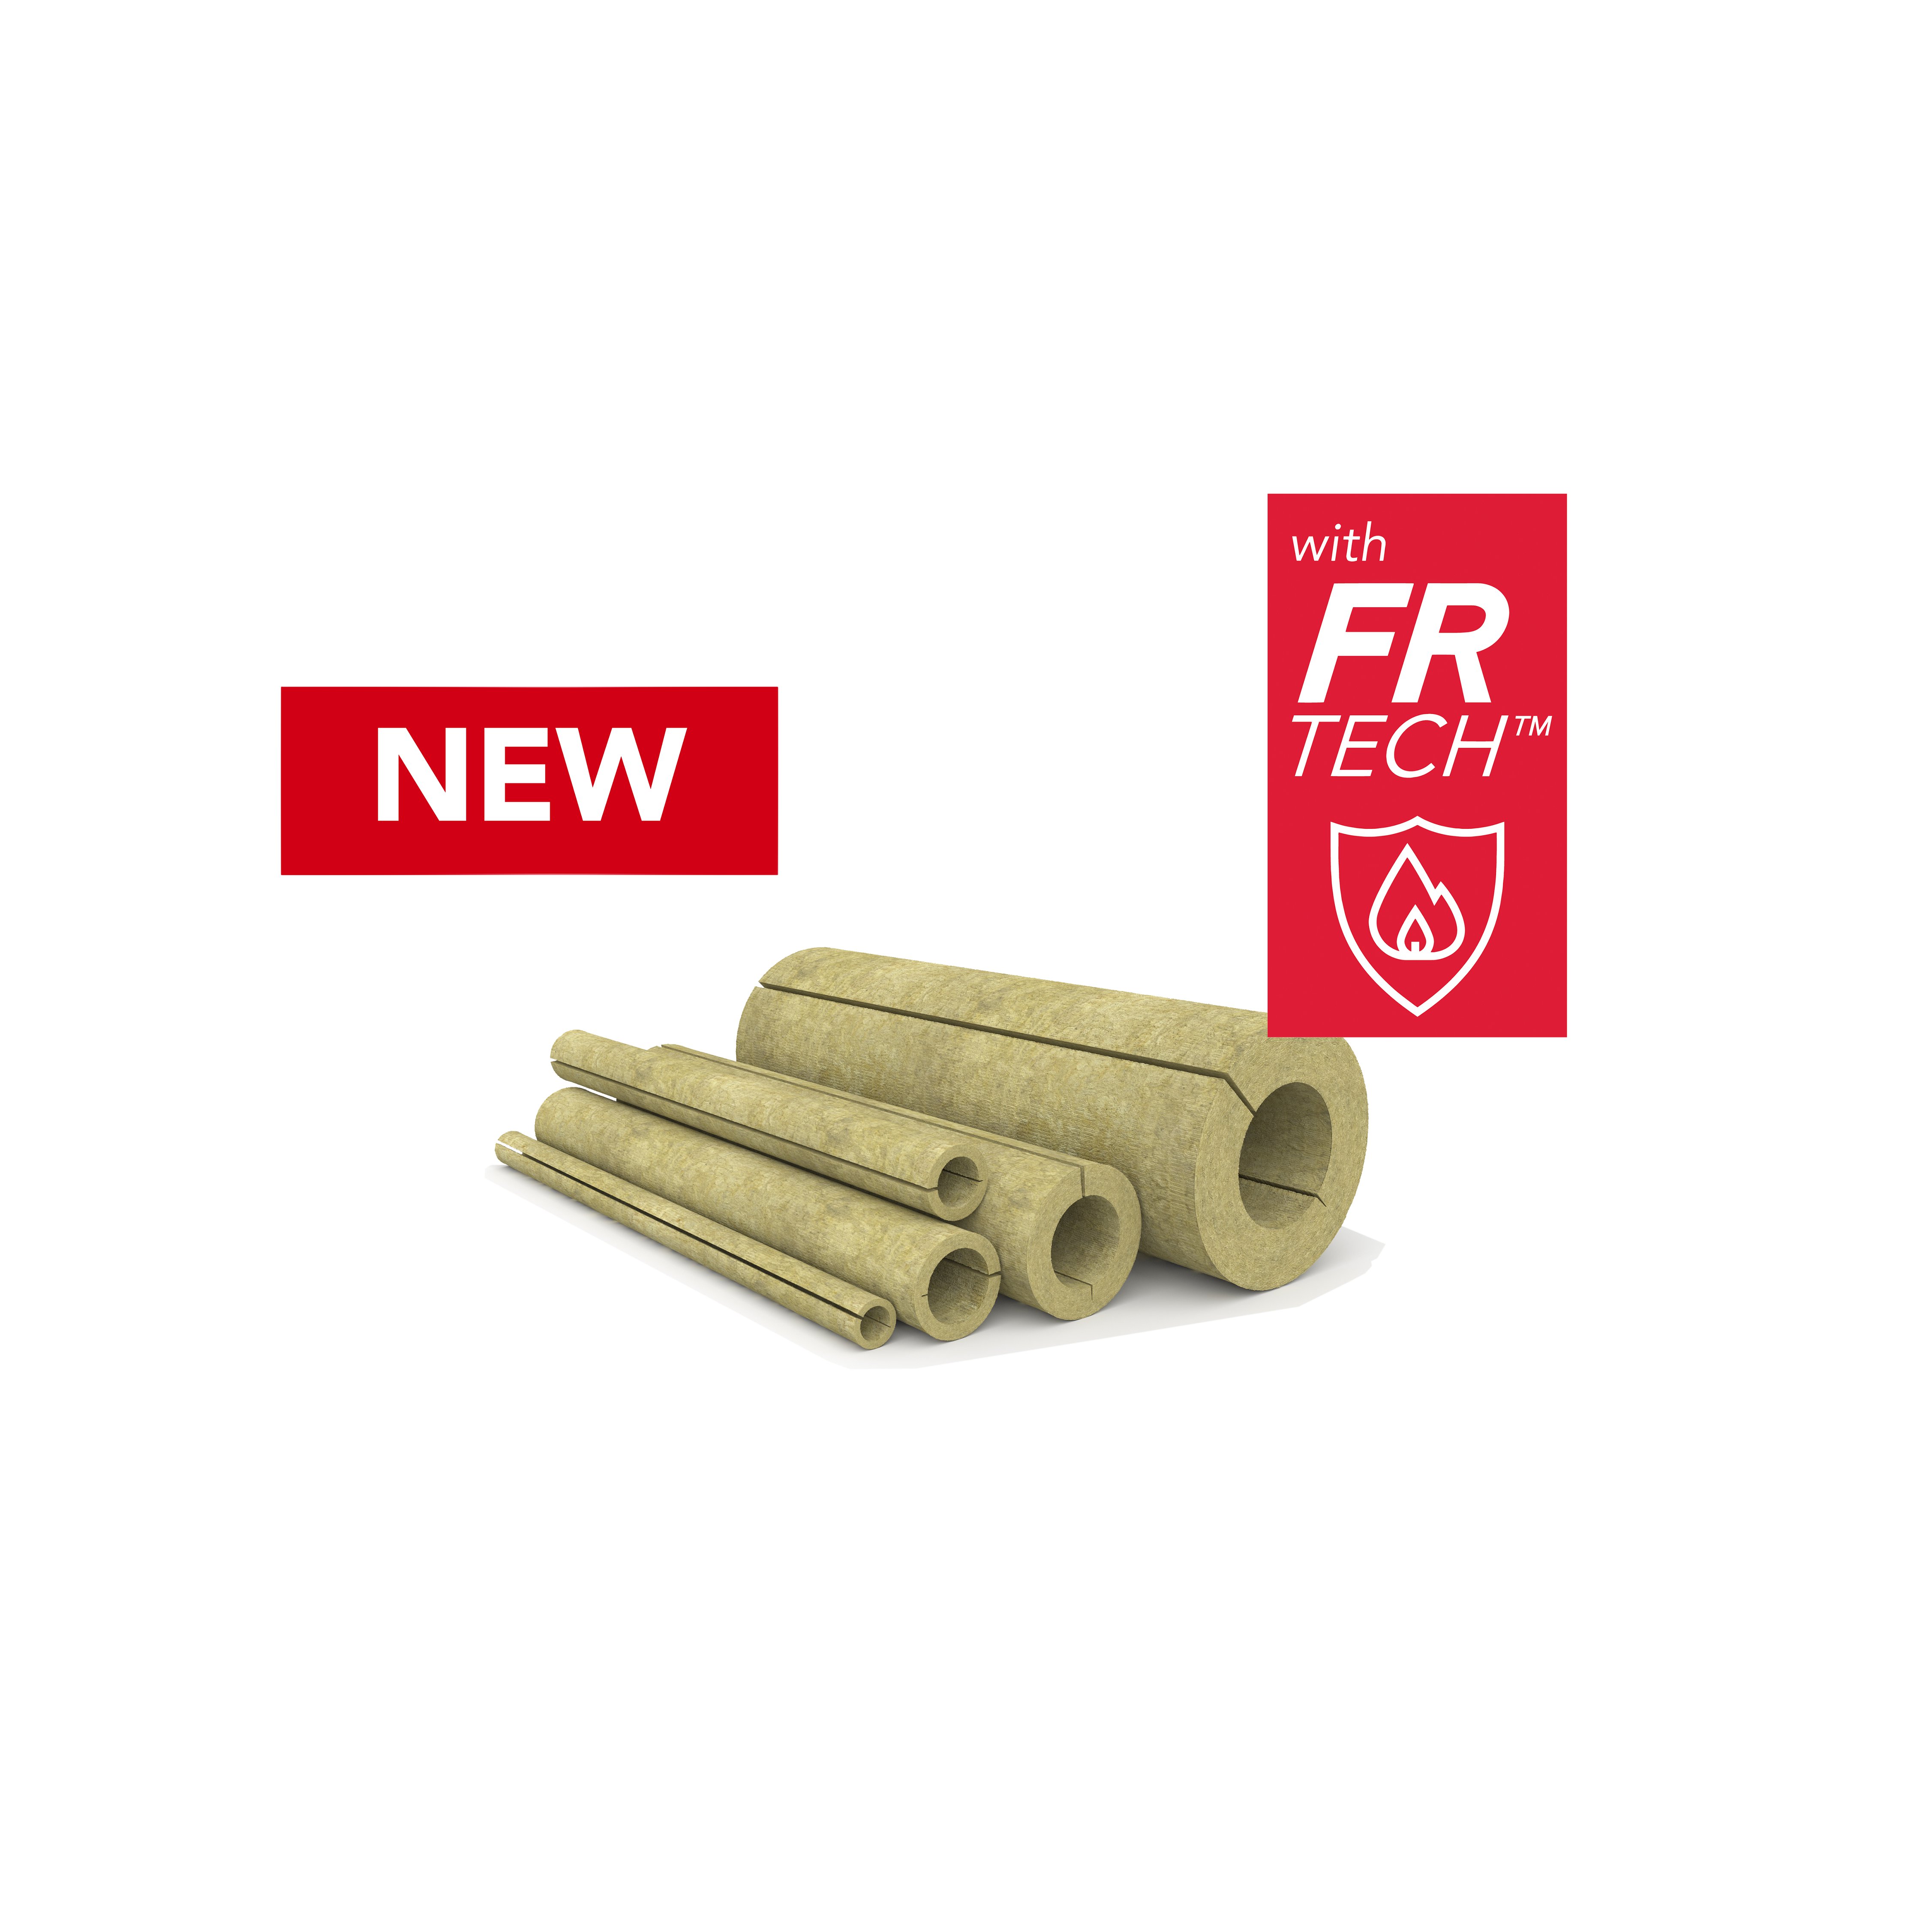 ROCKWOOL's ProRox® PS 680 with FR-Tech™: Delivering proven passive